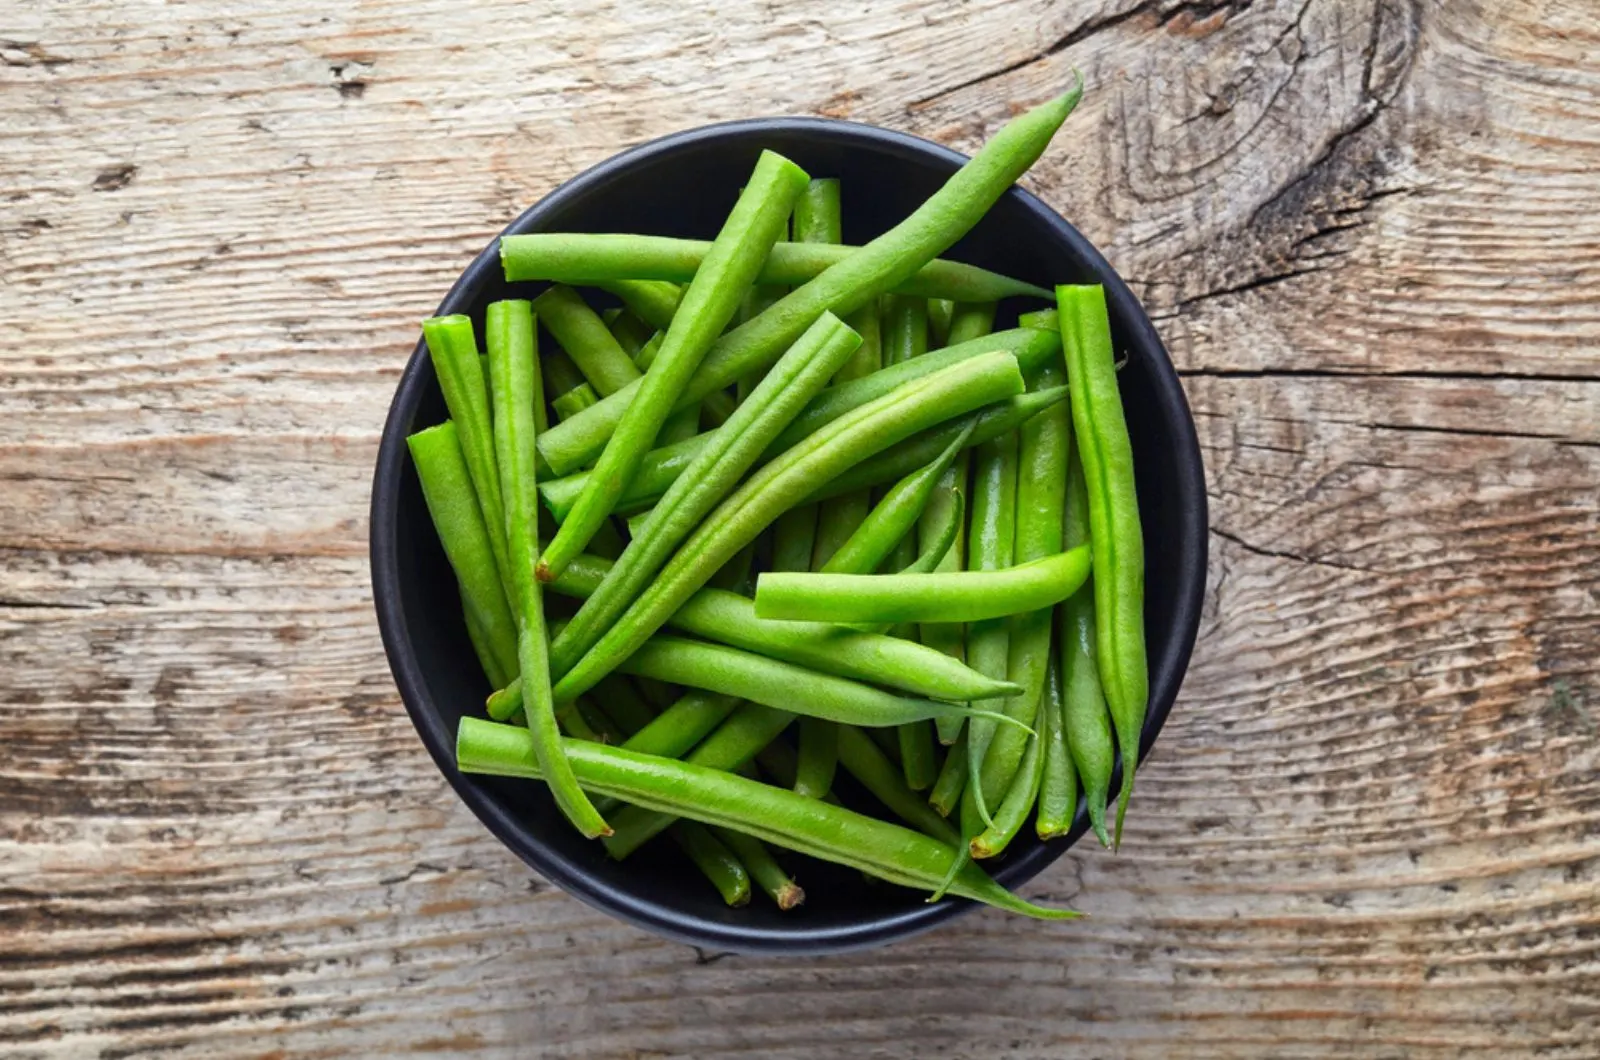 green beans in a bowl on the wooden table